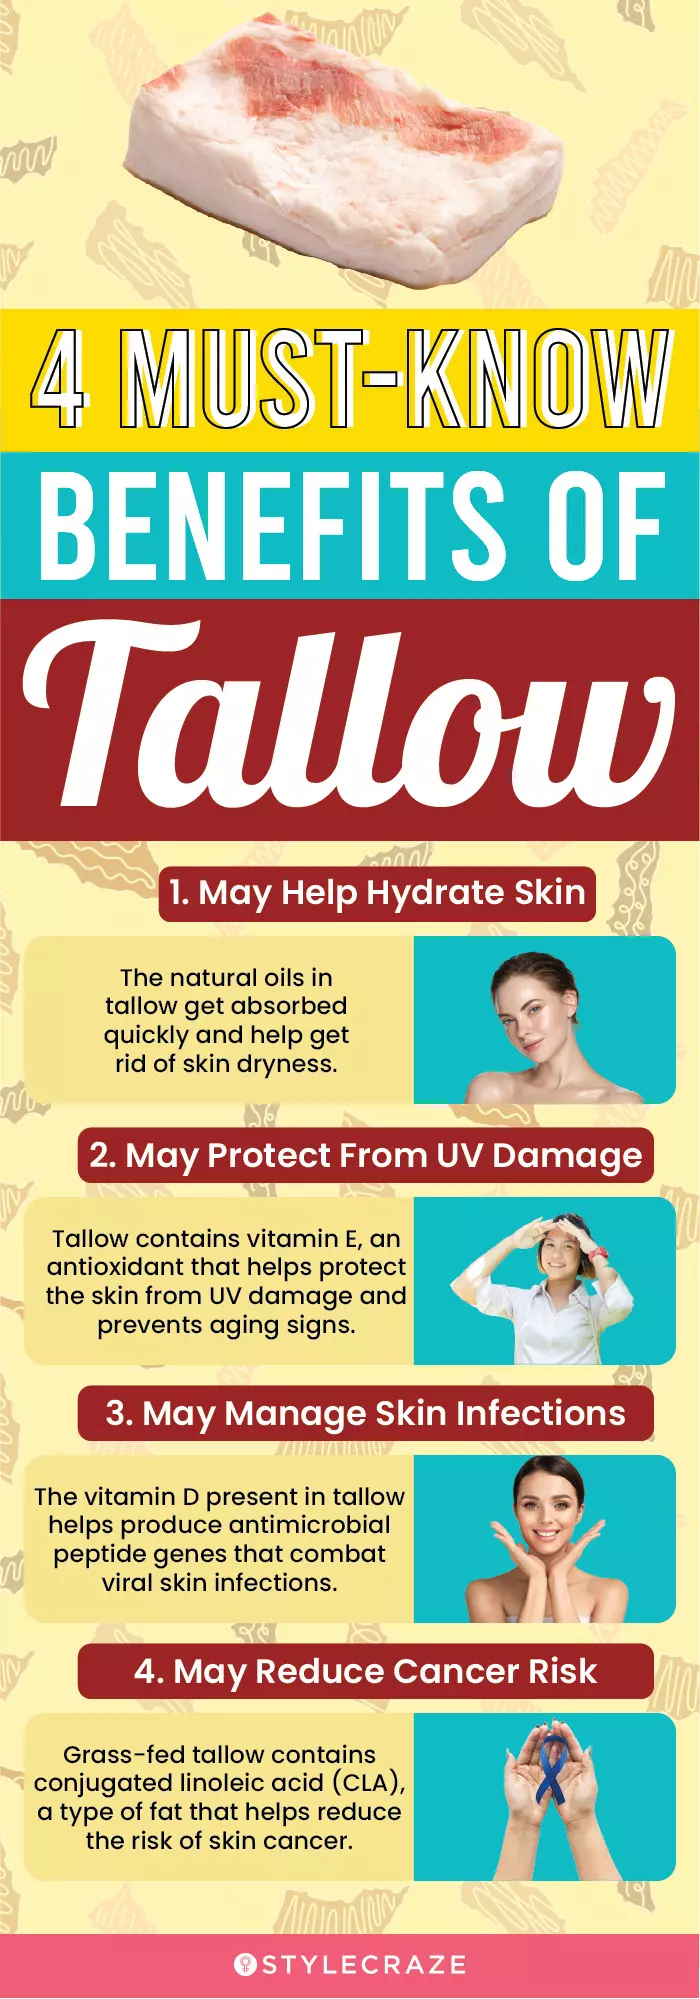 4 must know benefits of tallow (infographic)